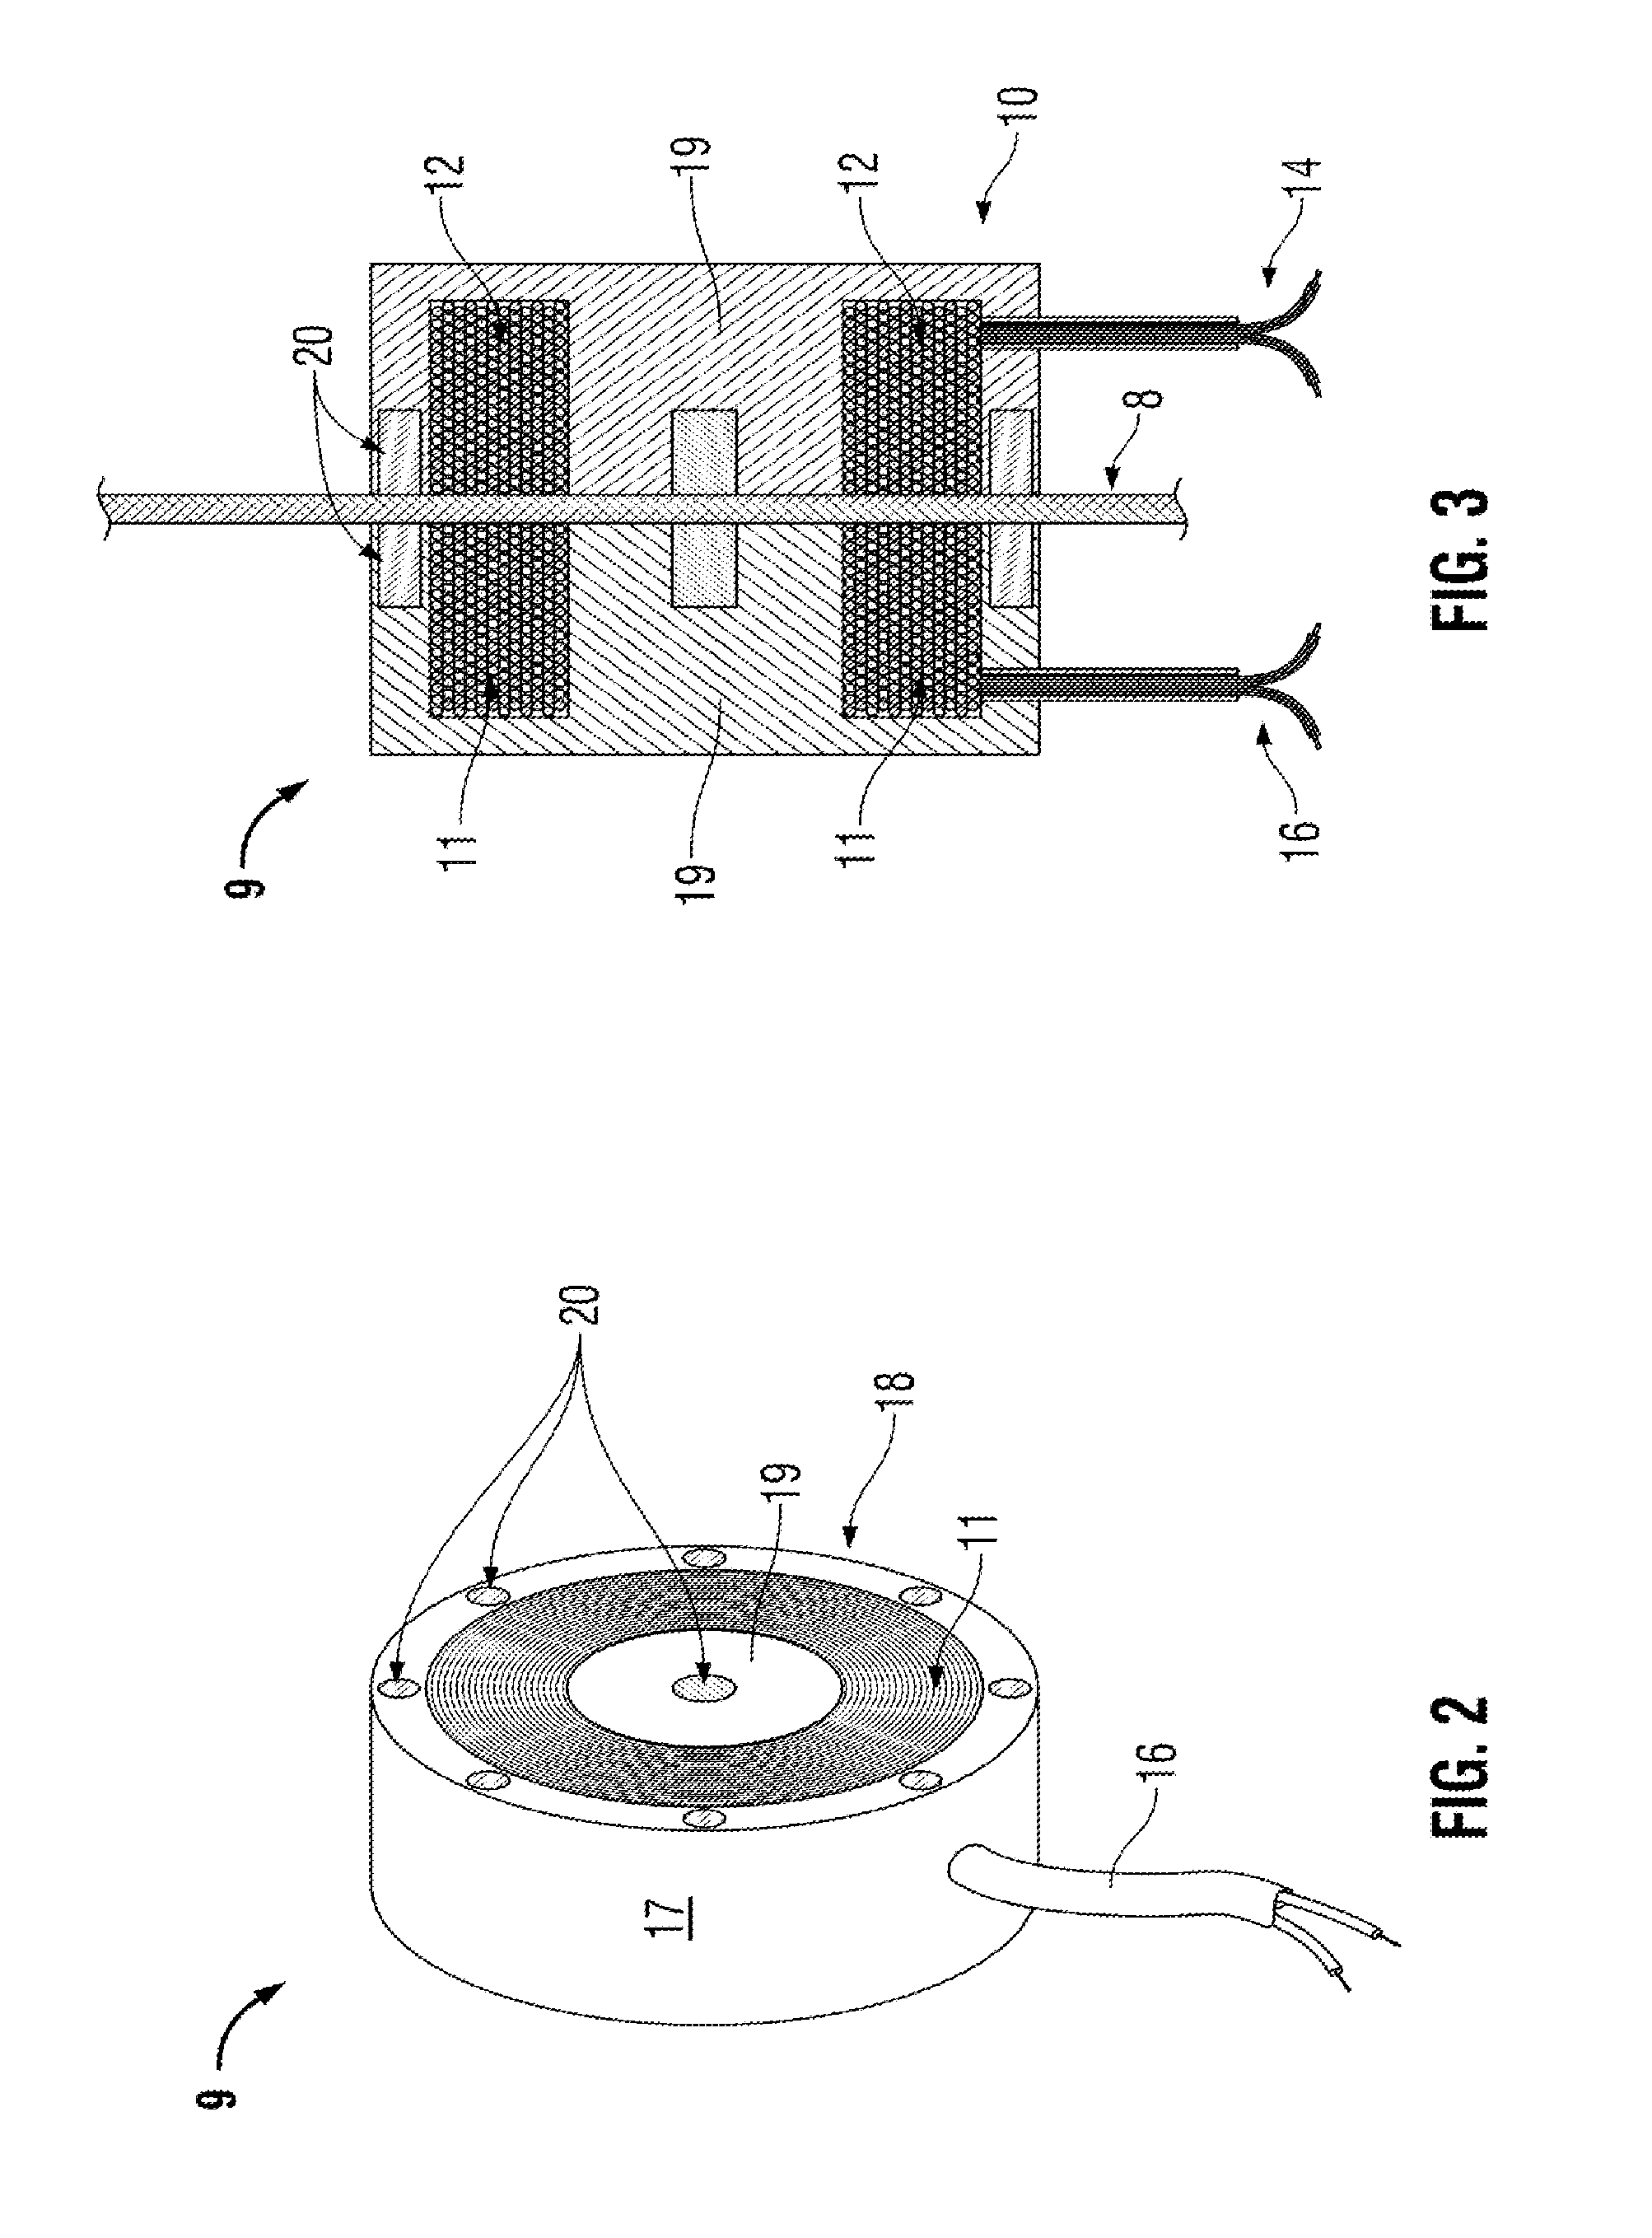 Surgical sterilizer with integrated battery charging device